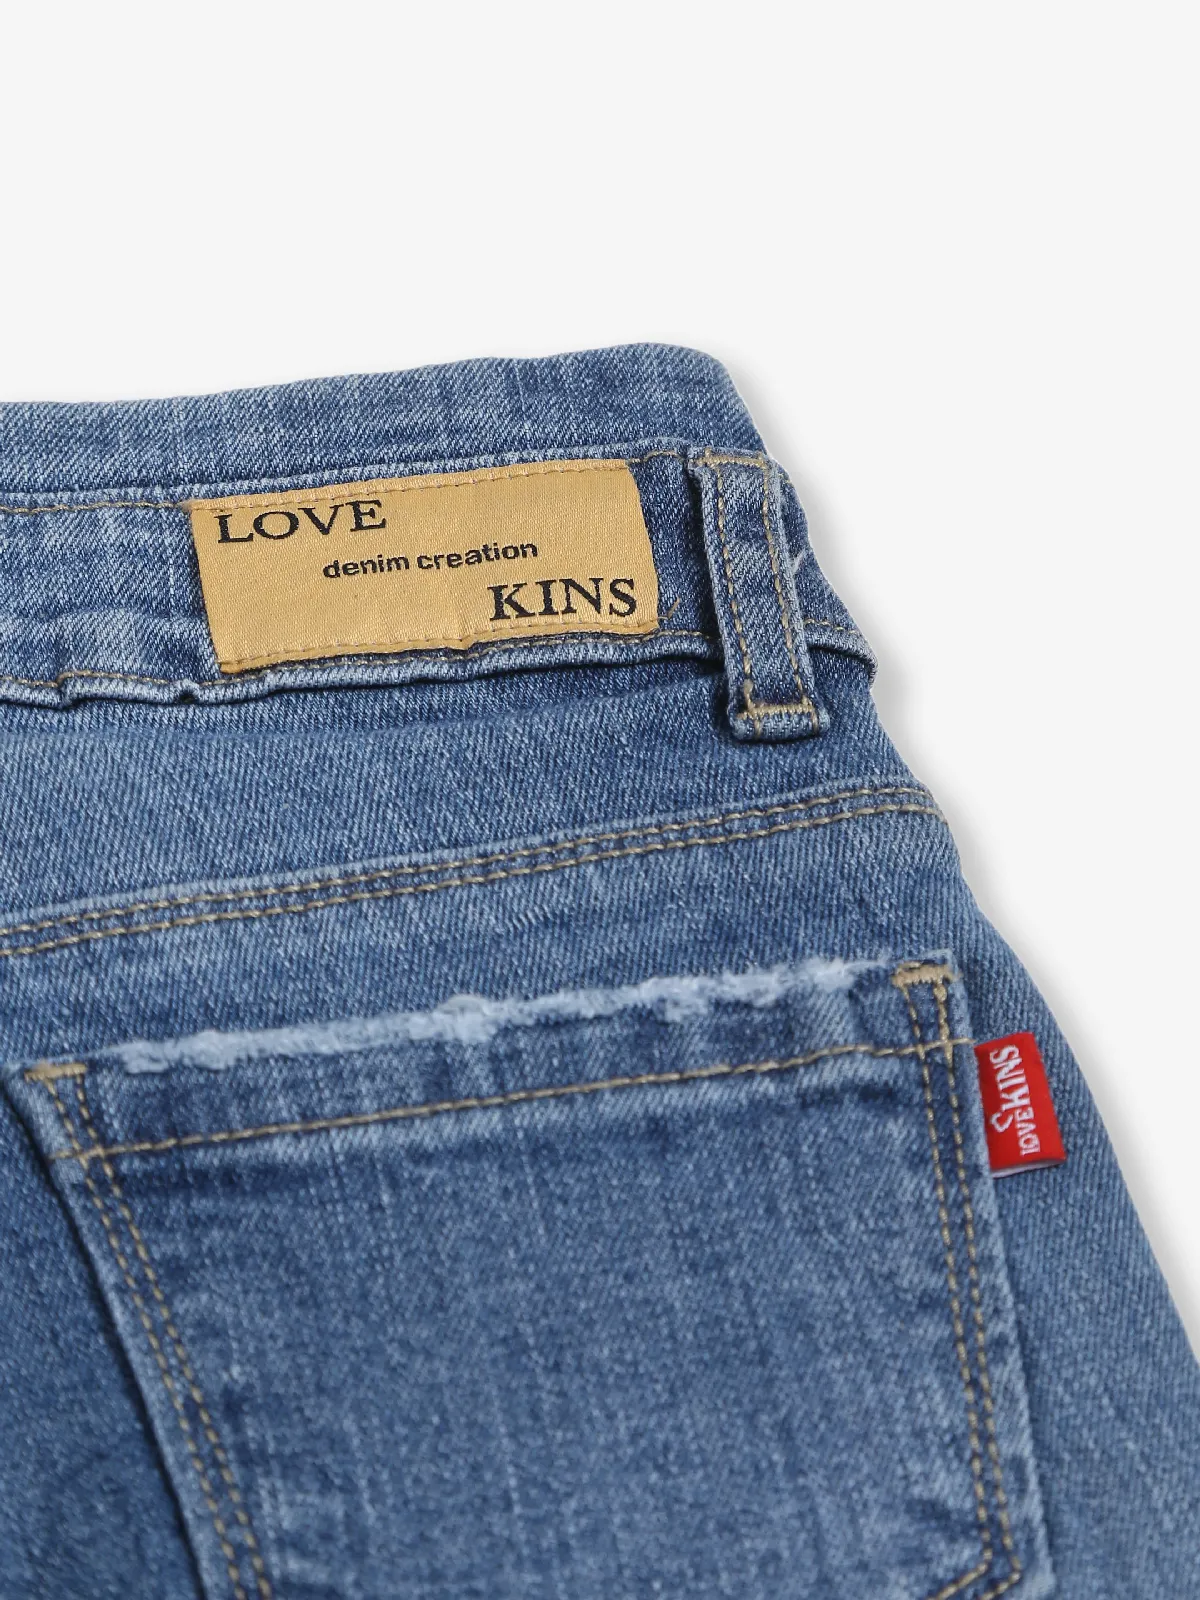 Lovekins blue ripped casual jeans